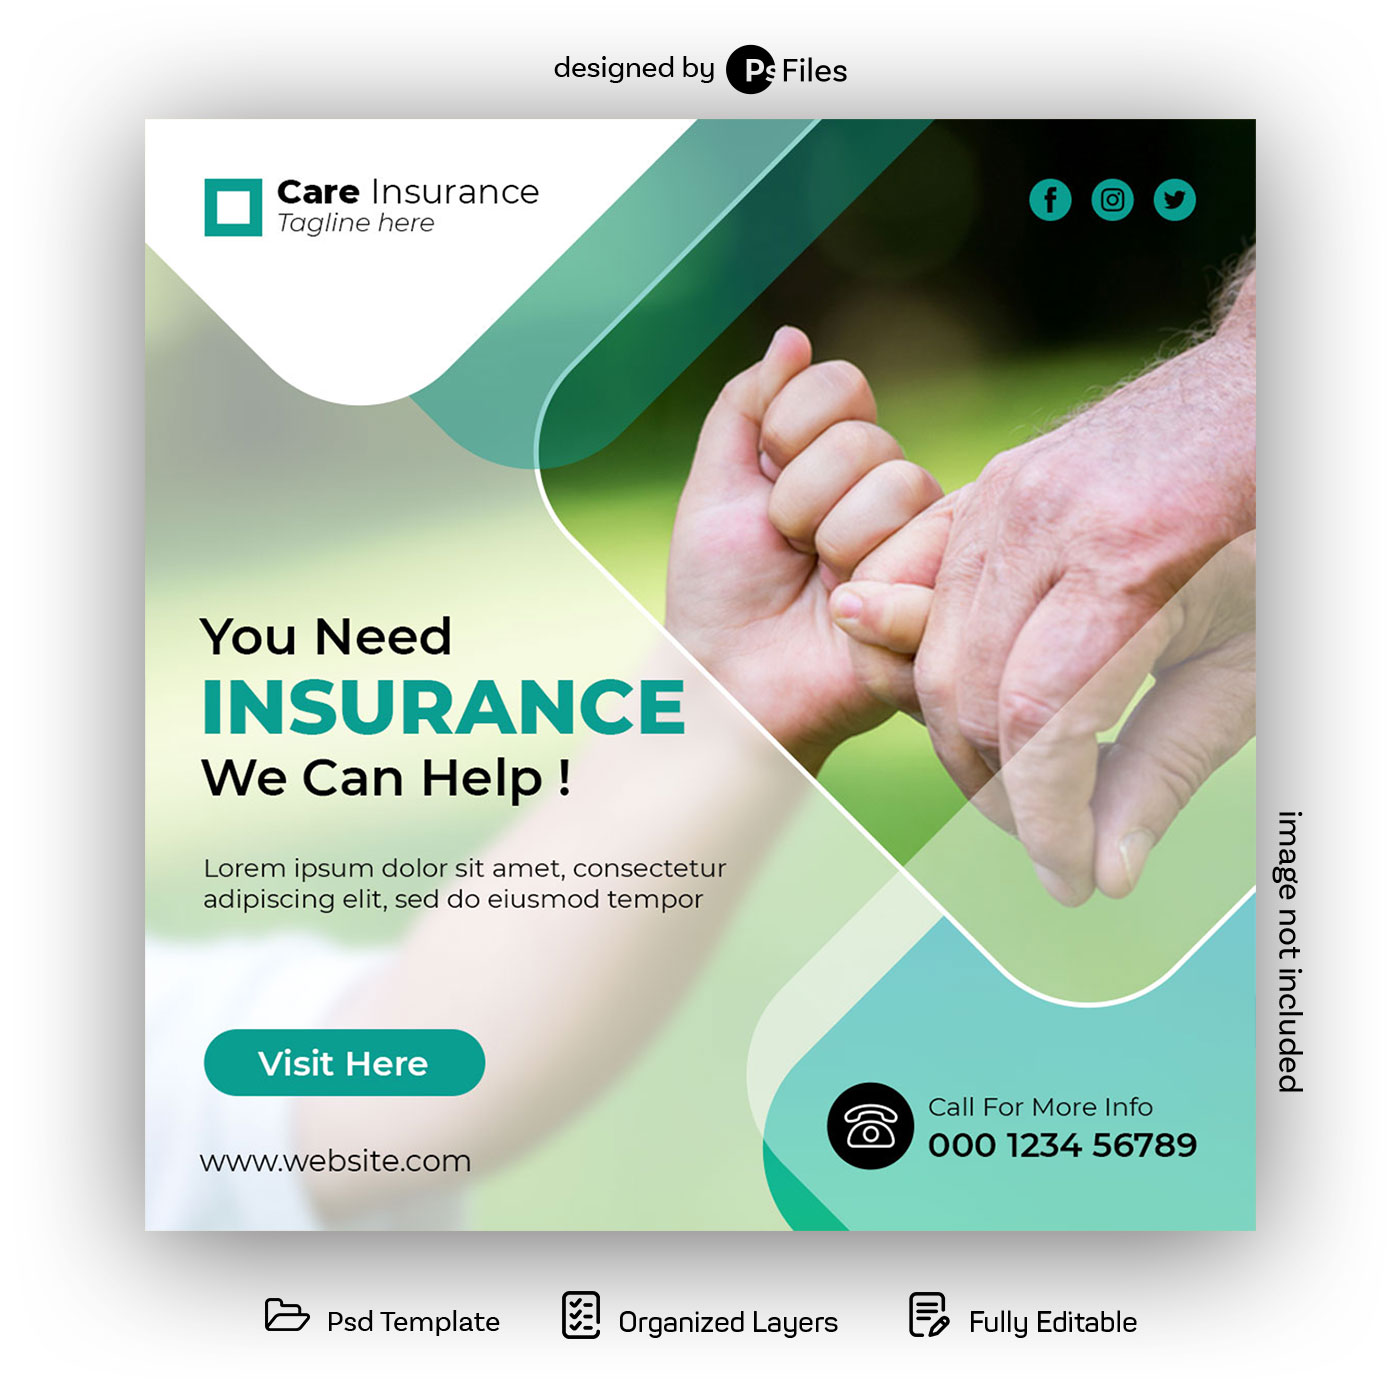 PsFiles Health Insurance Agency Post Design PSD Template